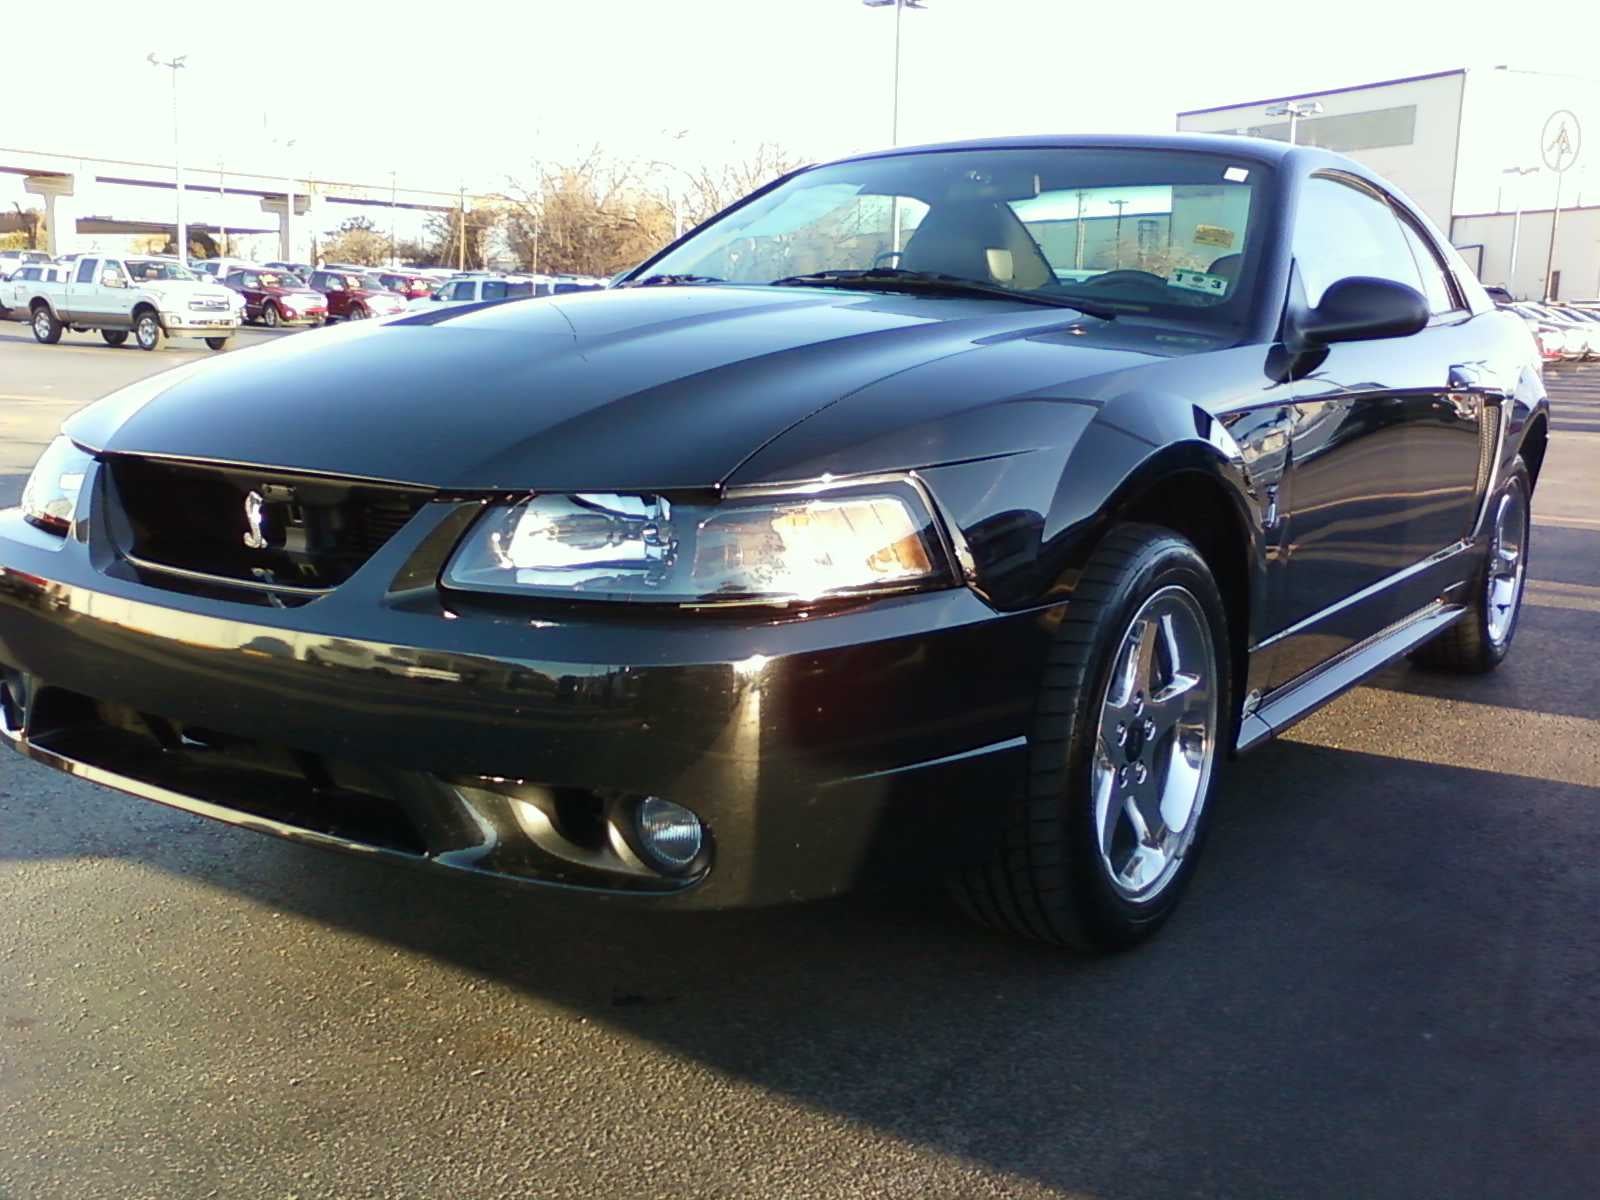 2001 Ford mustang cobra coupe specs #2